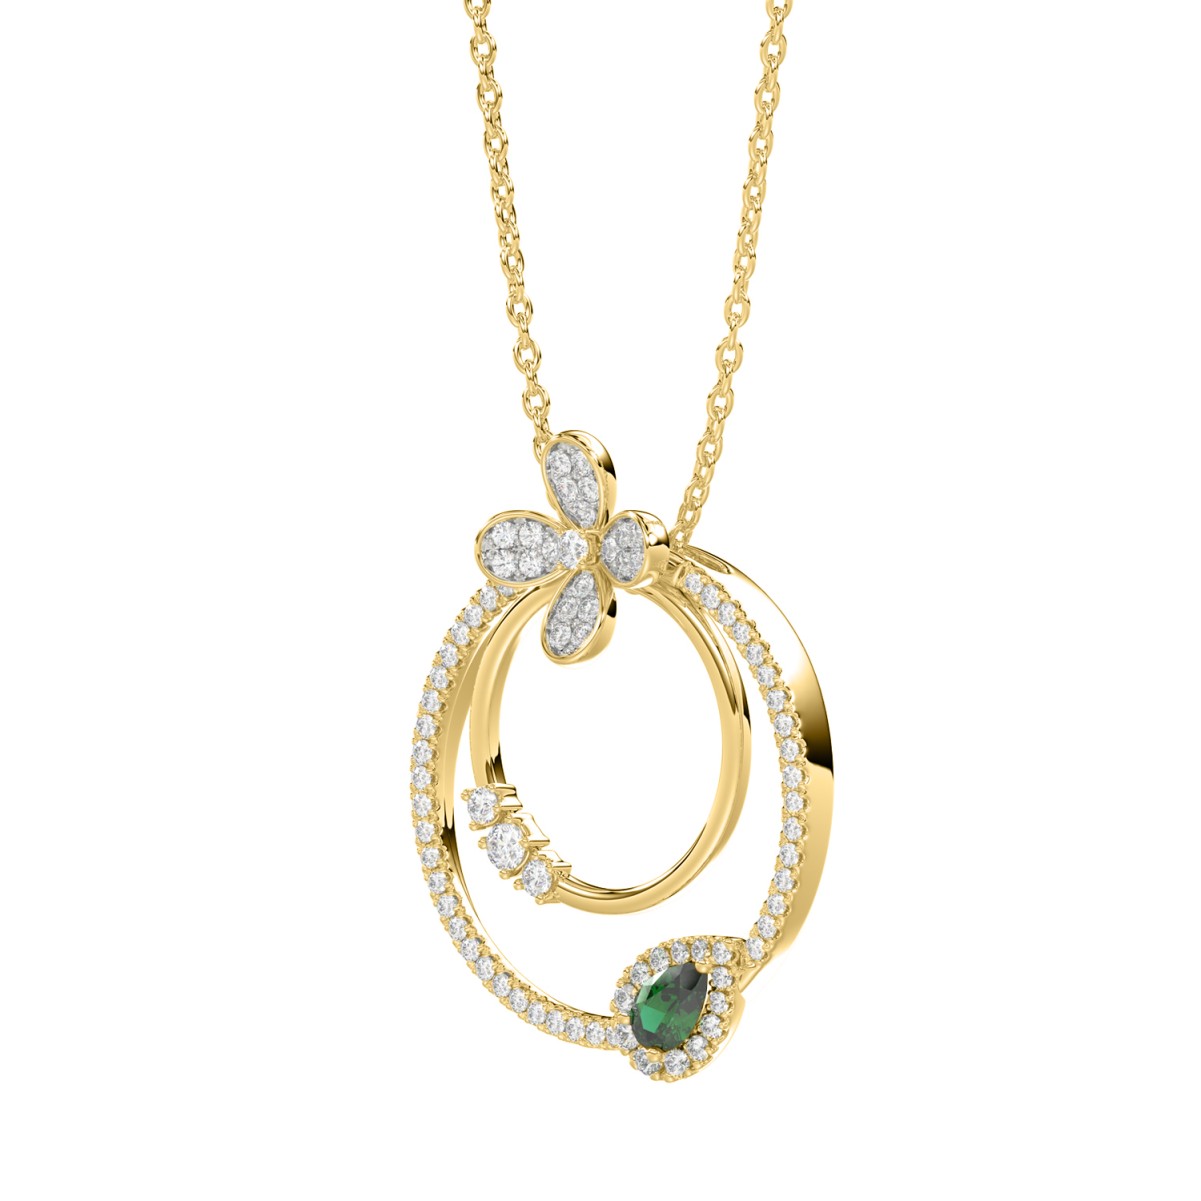 18K YELLOW GOLD 7/8CT ROUND/PEAR DIAMOND LADIES PENDANT WITH CHAIN(COLOR STONE PEAR GREEN EMERALD DIAMOND 1/5CT)